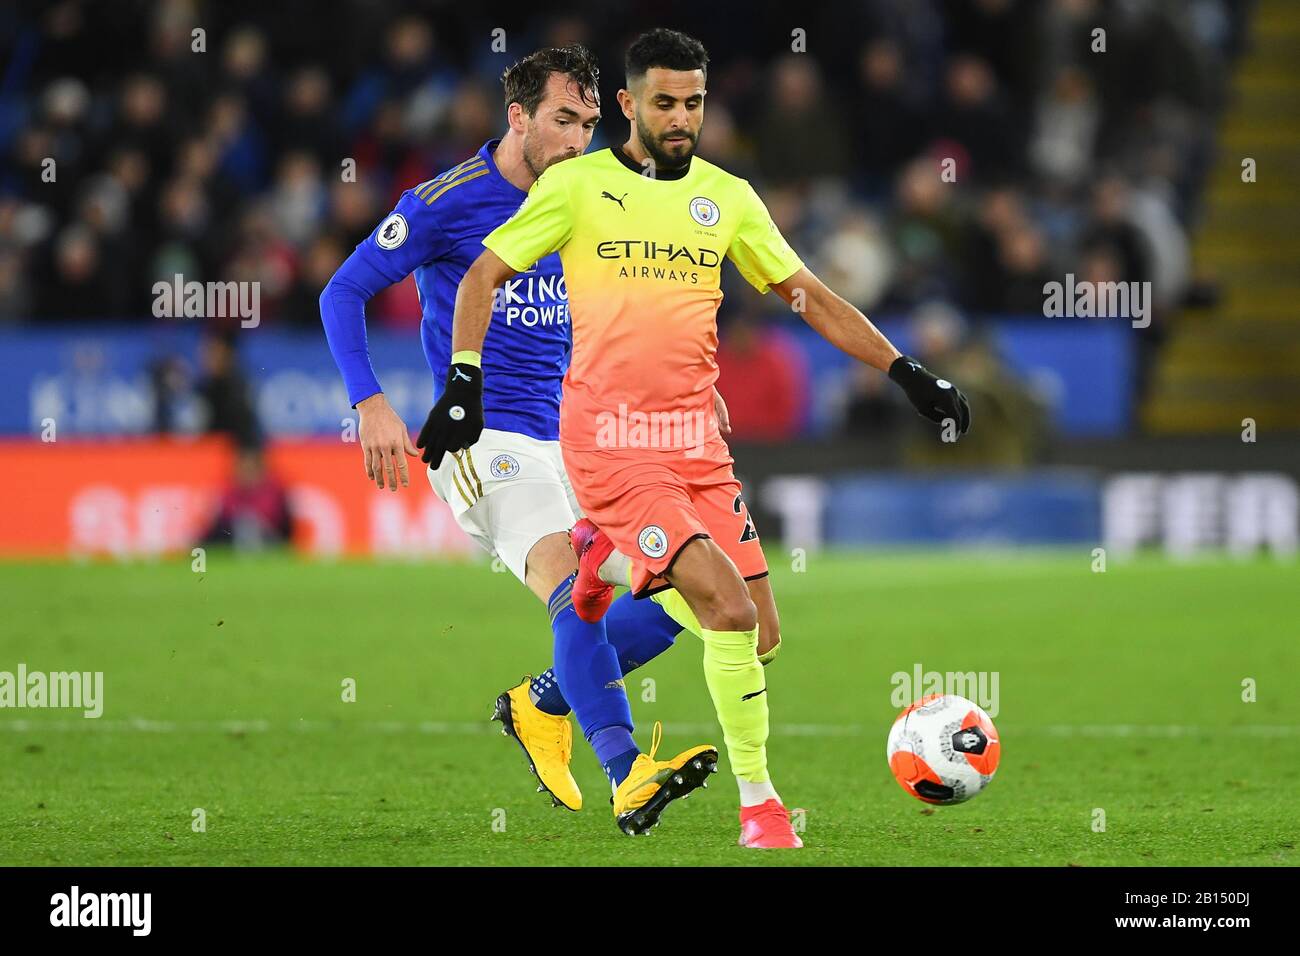 LEICESTER, ENGLAND - FEBRUARY 22ND Riyad Mahrez (26) of Manchester City during the Premier League match between Leicester City and Manchester City at the King Power Stadium, Leicester on Saturday 22nd February 2020. (Credit: Jon Hobley | MI News) Photograph may only be used for newspaper and/or magazine editorial purposes, license required for commercial use Credit: MI News & Sport /Alamy Live News Stock Photo